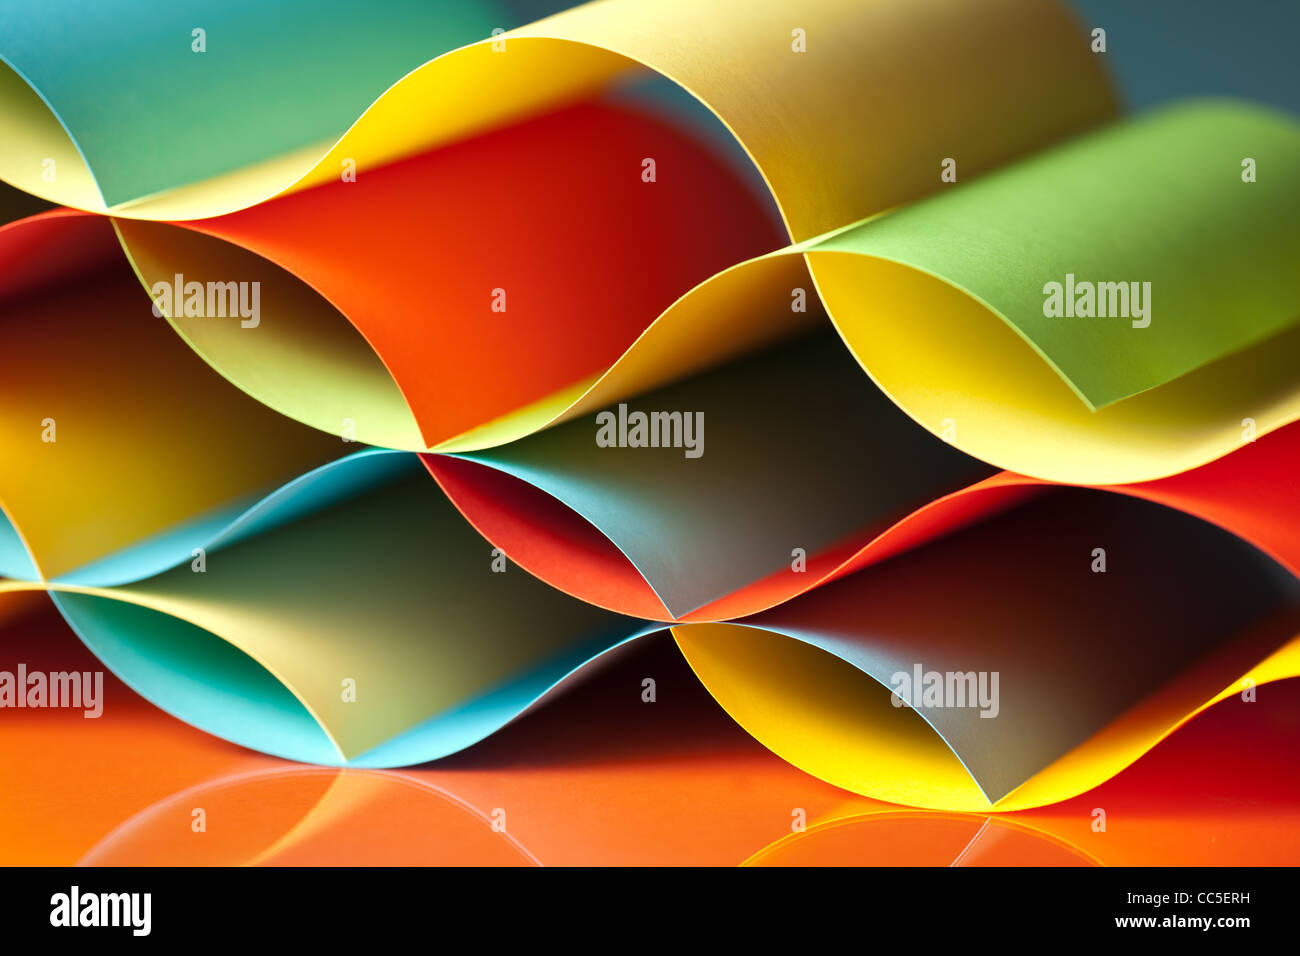 background macro image of colored origami pattern made of curved sheets of paper, with mirror reflexions Stock Photo